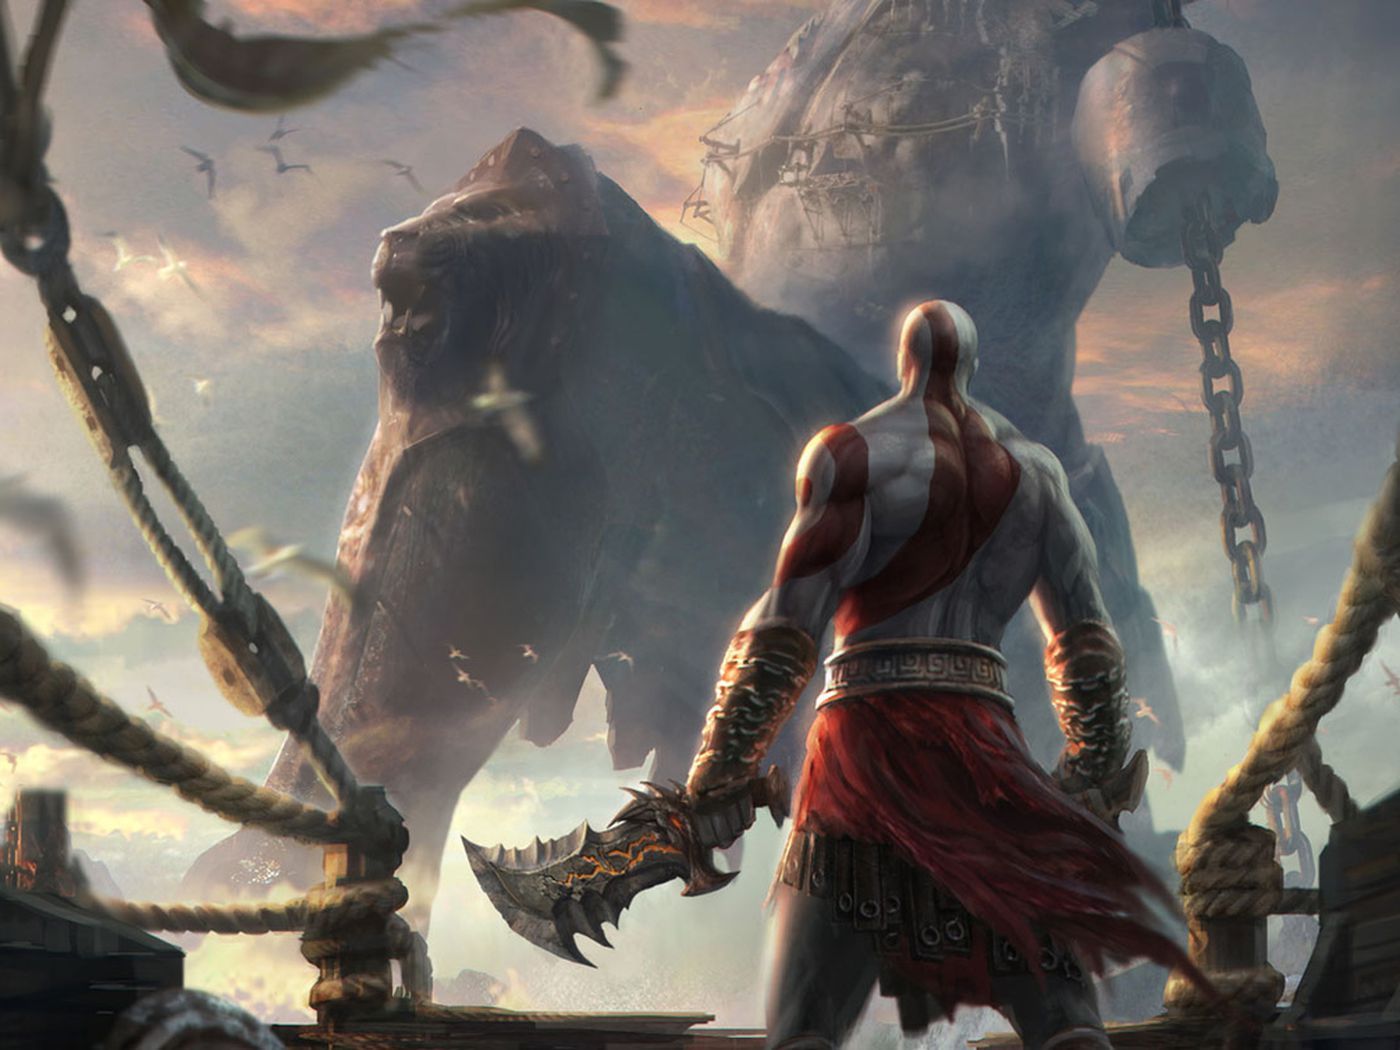 Ranking the God of War games